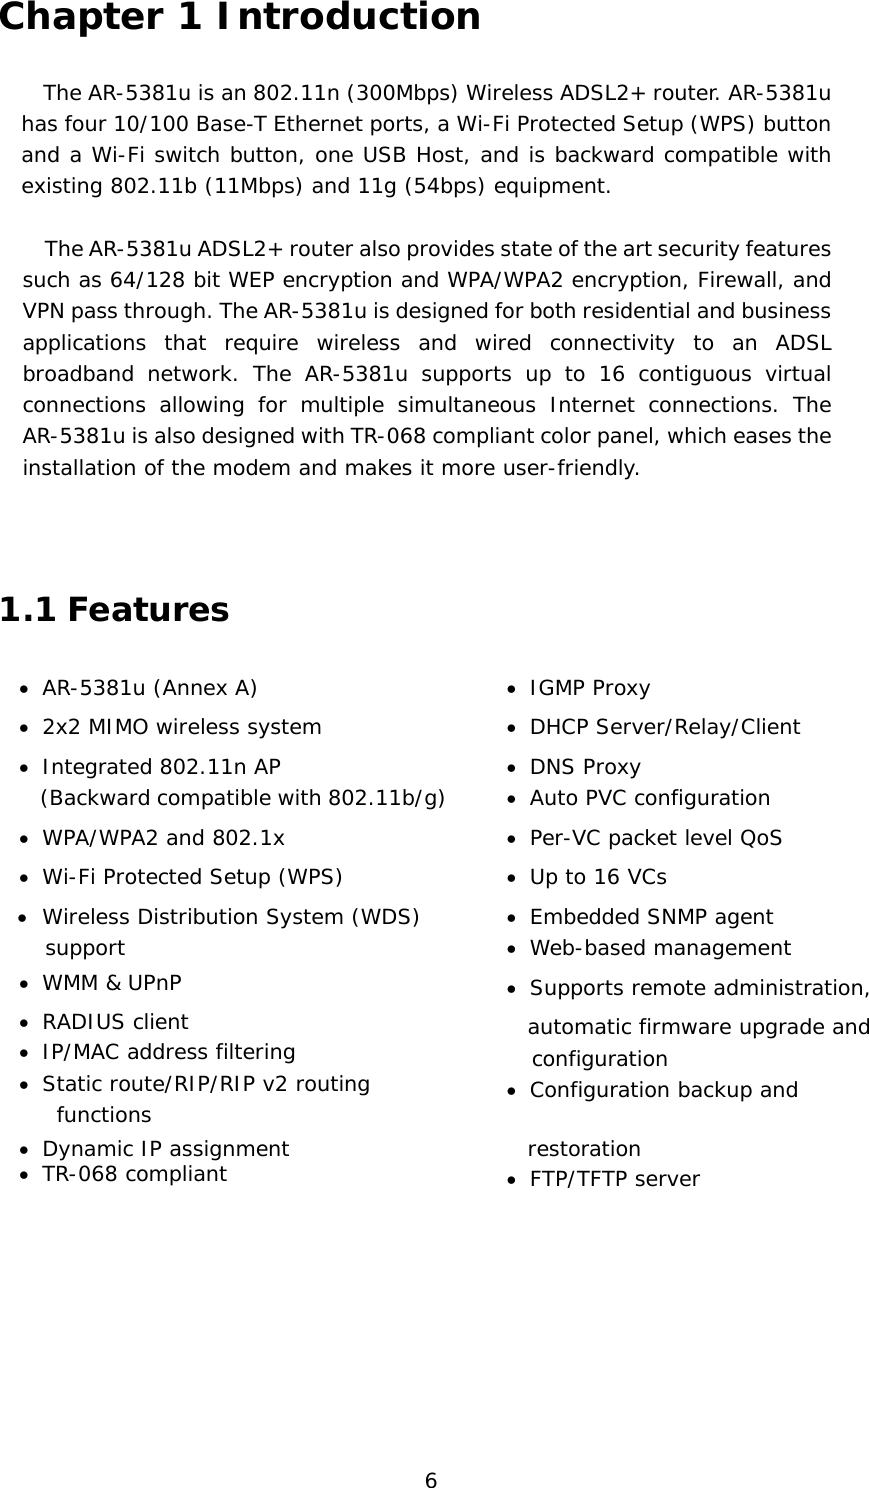  6 Chapter 1 Introduction The AR-5381u is an 802.11n (300Mbps) Wireless ADSL2+ router. AR-5381u has four 10/100 Base-T Ethernet ports, a Wi-Fi Protected Setup (WPS) button and a Wi-Fi switch button, one USB Host, and is backward compatible with existing 802.11b (11Mbps) and 11g (54bps) equipment.    The AR-5381u ADSL2+ router also provides state of the art security features such as 64/128 bit WEP encryption and WPA/WPA2 encryption, Firewall, and VPN pass through. The AR-5381u is designed for both residential and business applications that require wireless and wired connectivity to an ADSL broadband network. The AR-5381u supports up to 16 contiguous virtual connections allowing for multiple simultaneous Internet connections. The AR-5381u is also designed with TR-068 compliant color panel, which eases the installation of the modem and makes it more user-friendly.   1.1 Features •  AR-5381u (Annex A)  •  IGMP Proxy •  2x2 MIMO wireless system  •  DHCP Server/Relay/Client  •  Integrated 802.11n AP    (Backward compatible with 802.11b/g) •  DNS Proxy •  Auto PVC configuration •  WPA/WPA2 and 802.1x  •  Per-VC packet level QoS •  Wi-Fi Protected Setup (WPS)  •  Up to 16 VCs •  Wireless Distribution System (WDS) support •  Embedded SNMP agent •  Web-based management •  WMM &amp; UPnP  •  Supports remote administration,   •  RADIUS client •  IP/MAC address filtering •  Static route/RIP/RIP v2 routing functions   automatic firmware upgrade and       configuration •  Configuration backup and •  Dynamic IP assignment •  TR-068 compliant    restoration •  FTP/TFTP server       